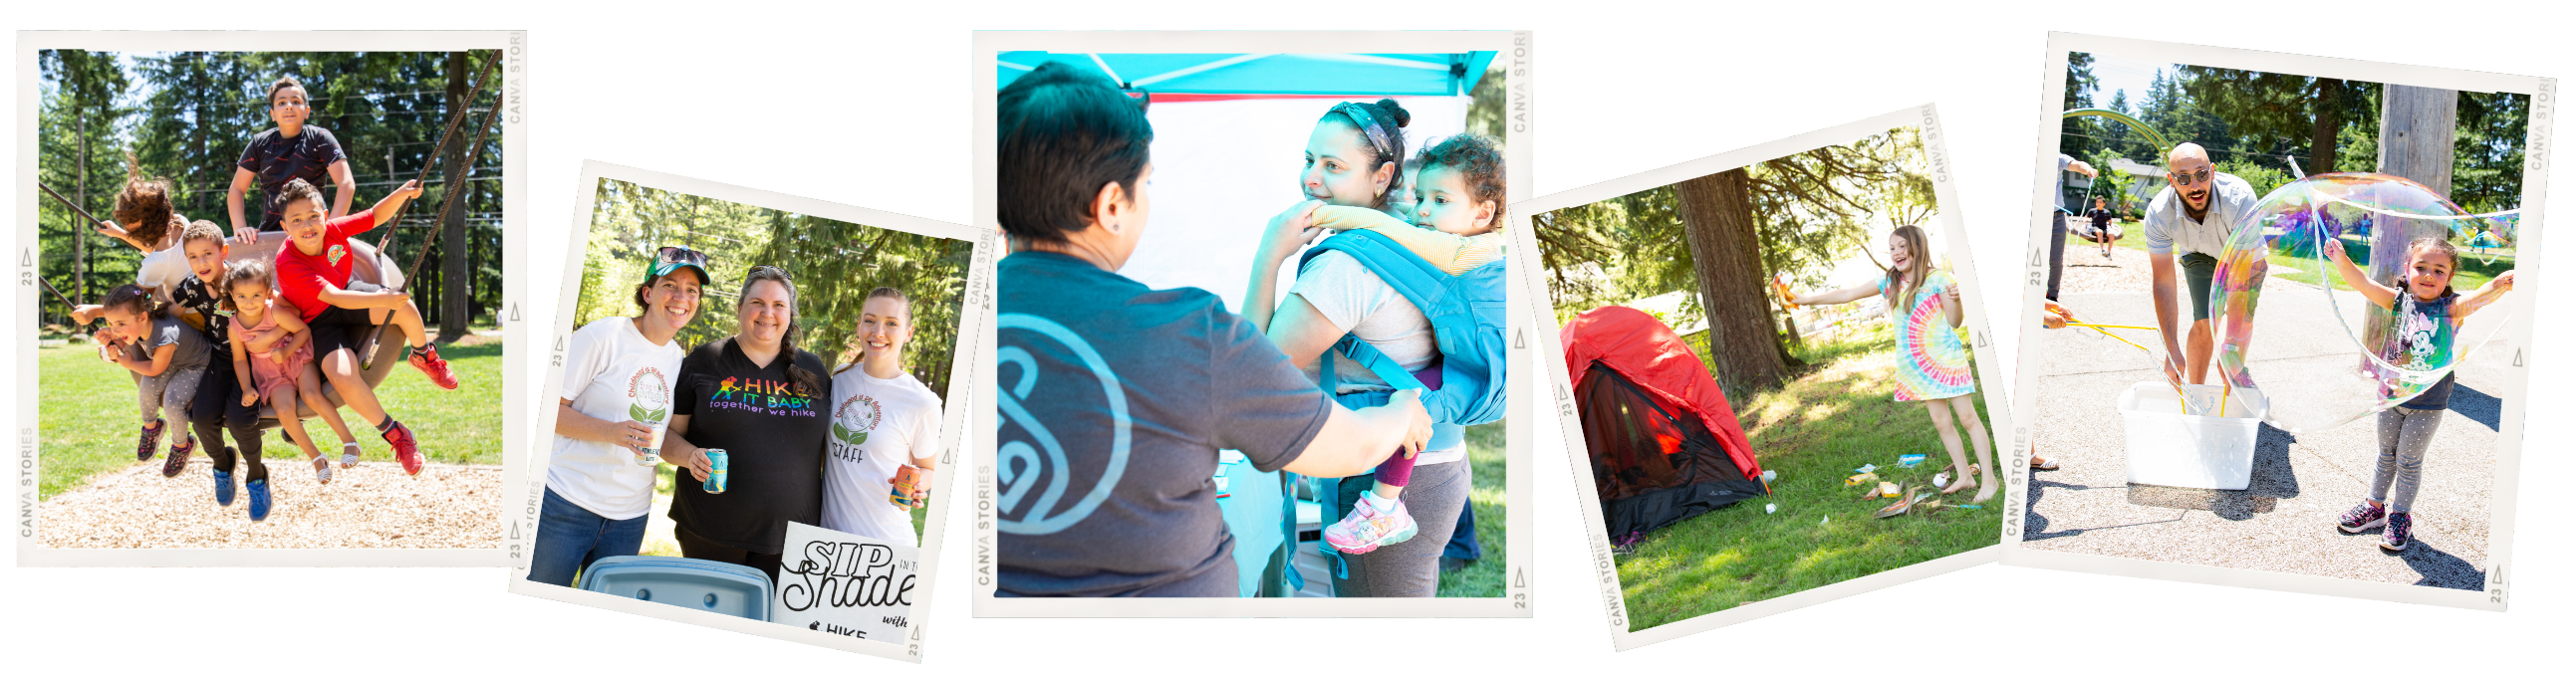 collage of images of families at the festival